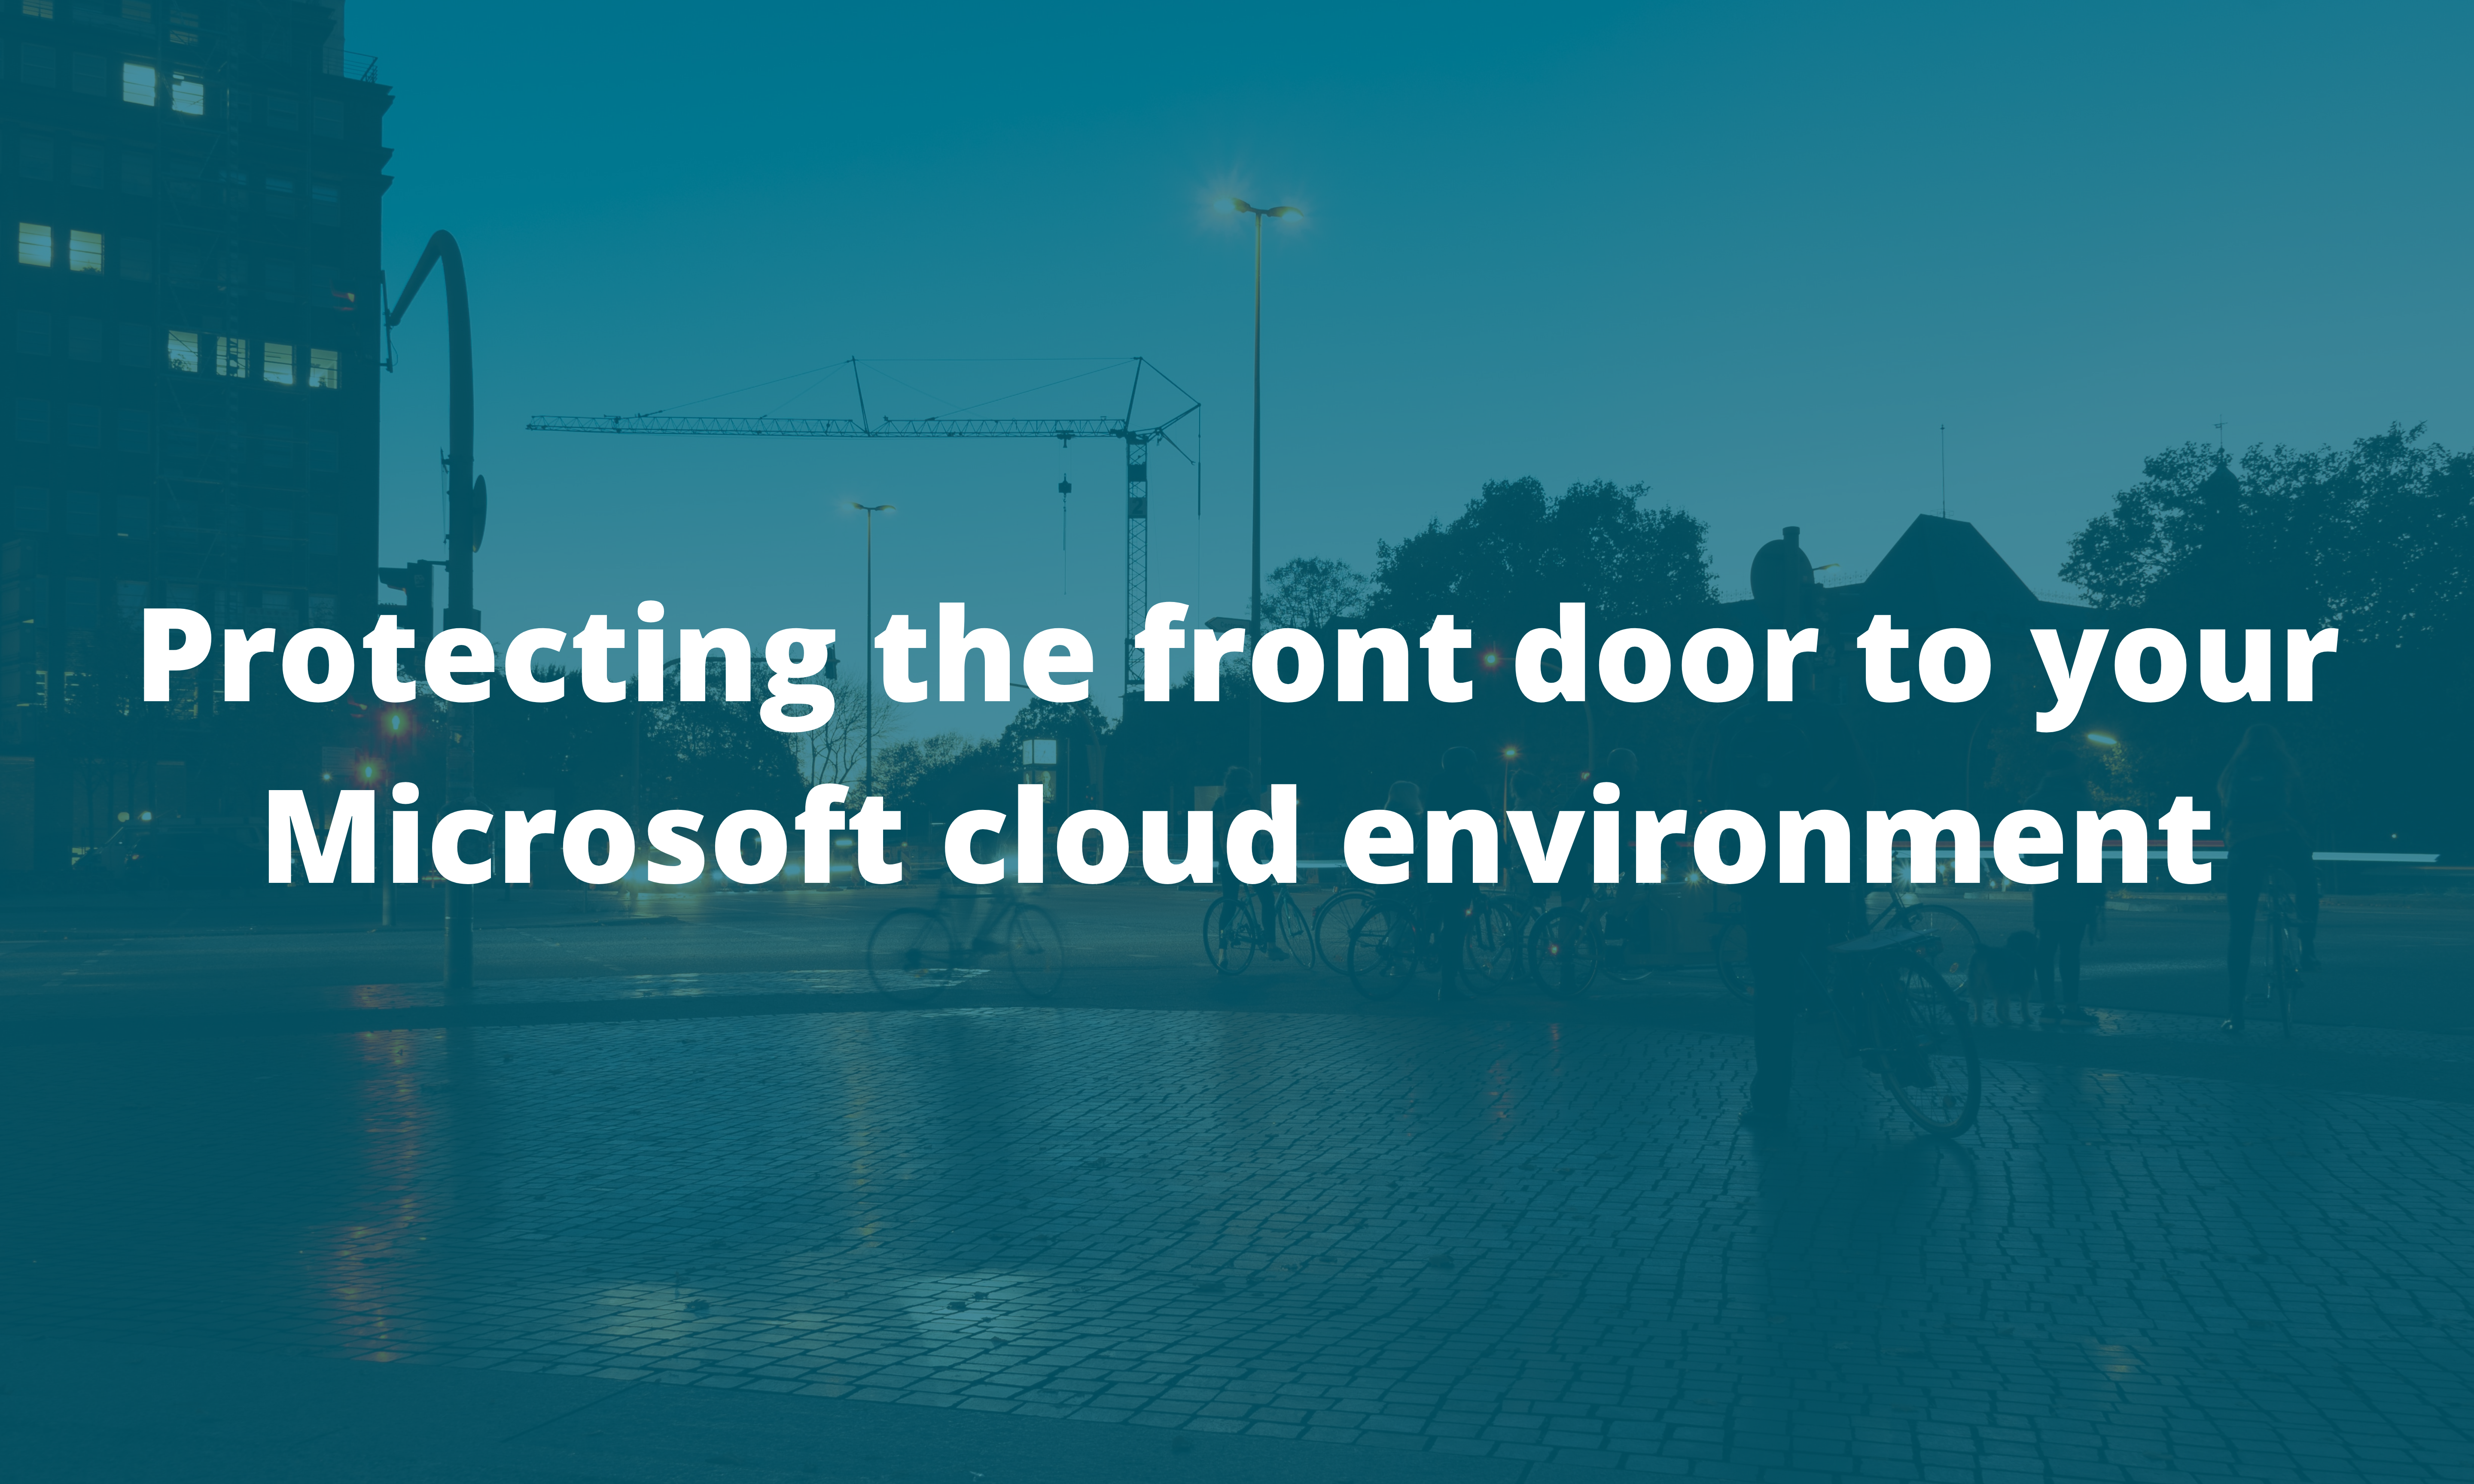 Protecting the front door to your Microsoft cloud environment